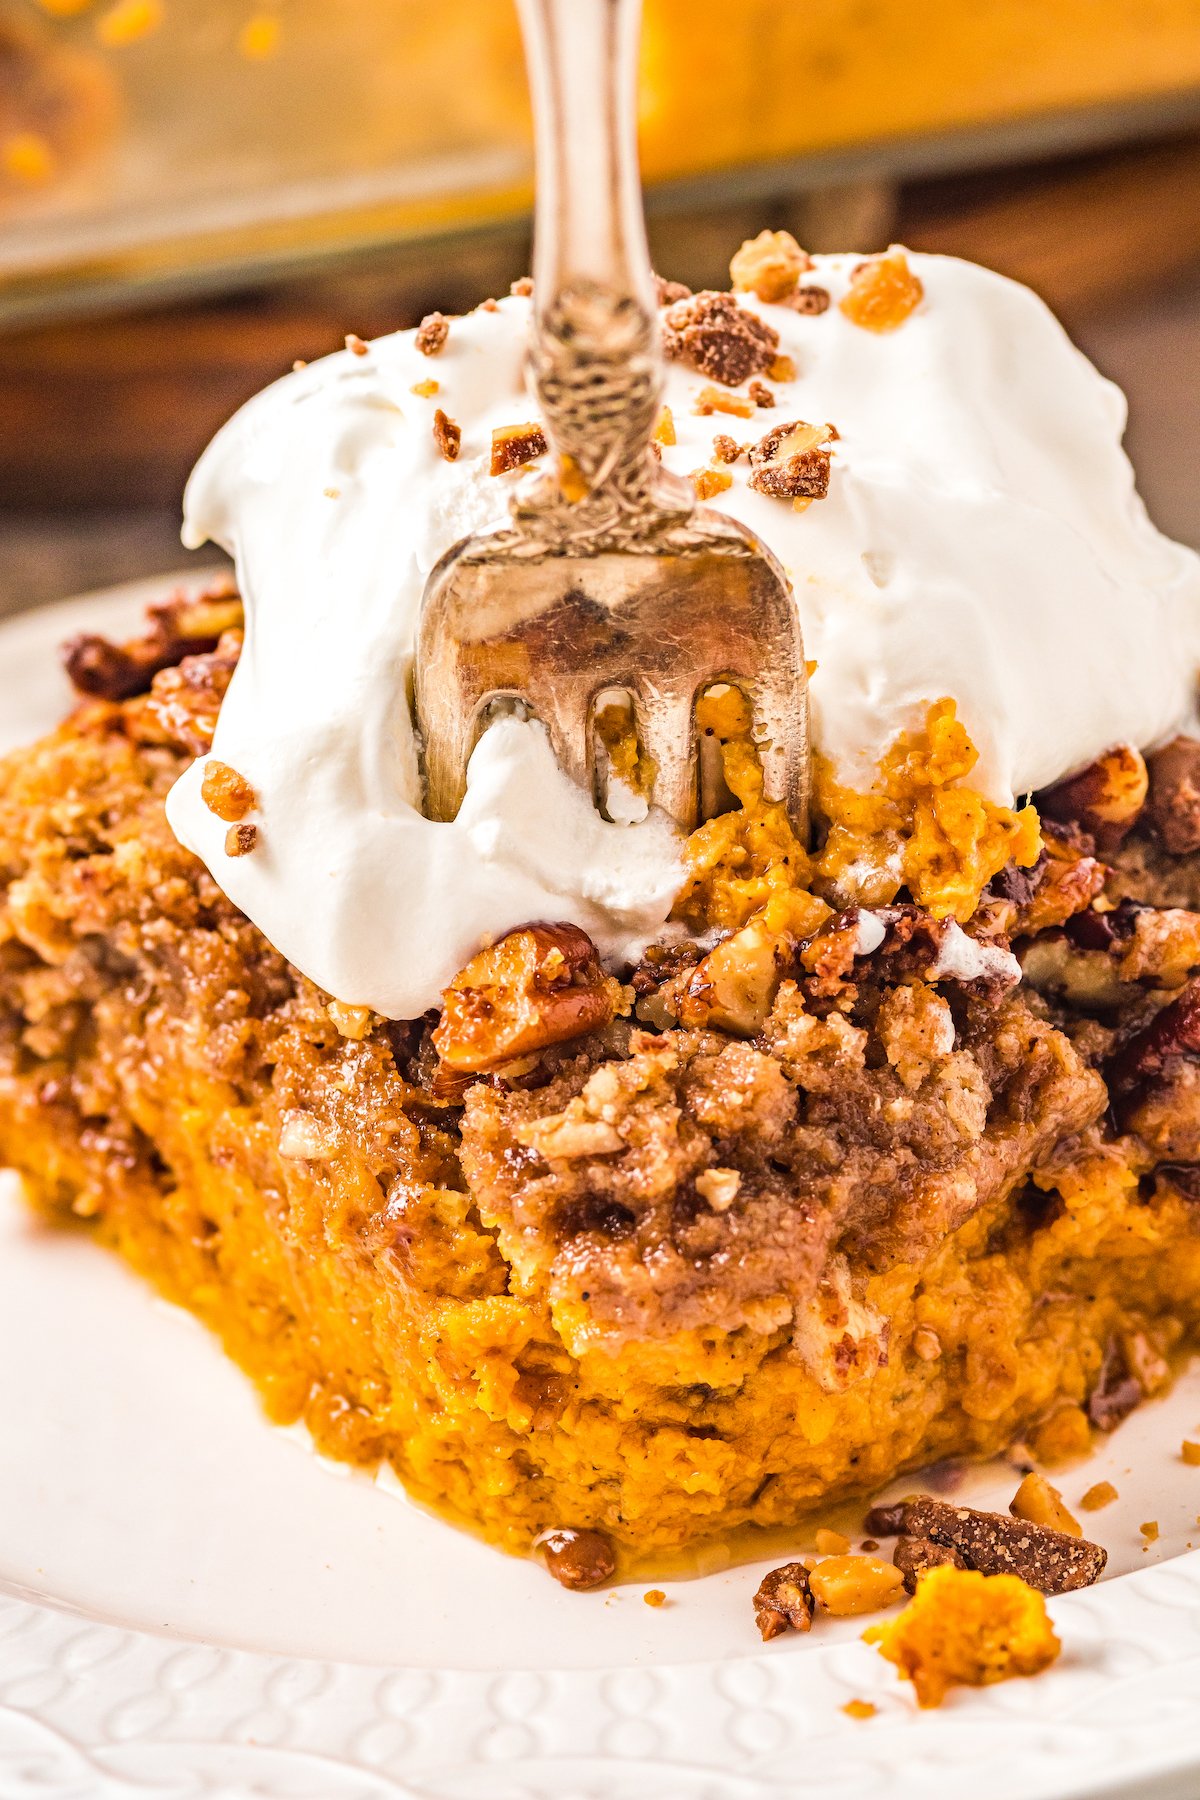 A rich pumpkin dessert with a pecan topping and ice cream garnish.